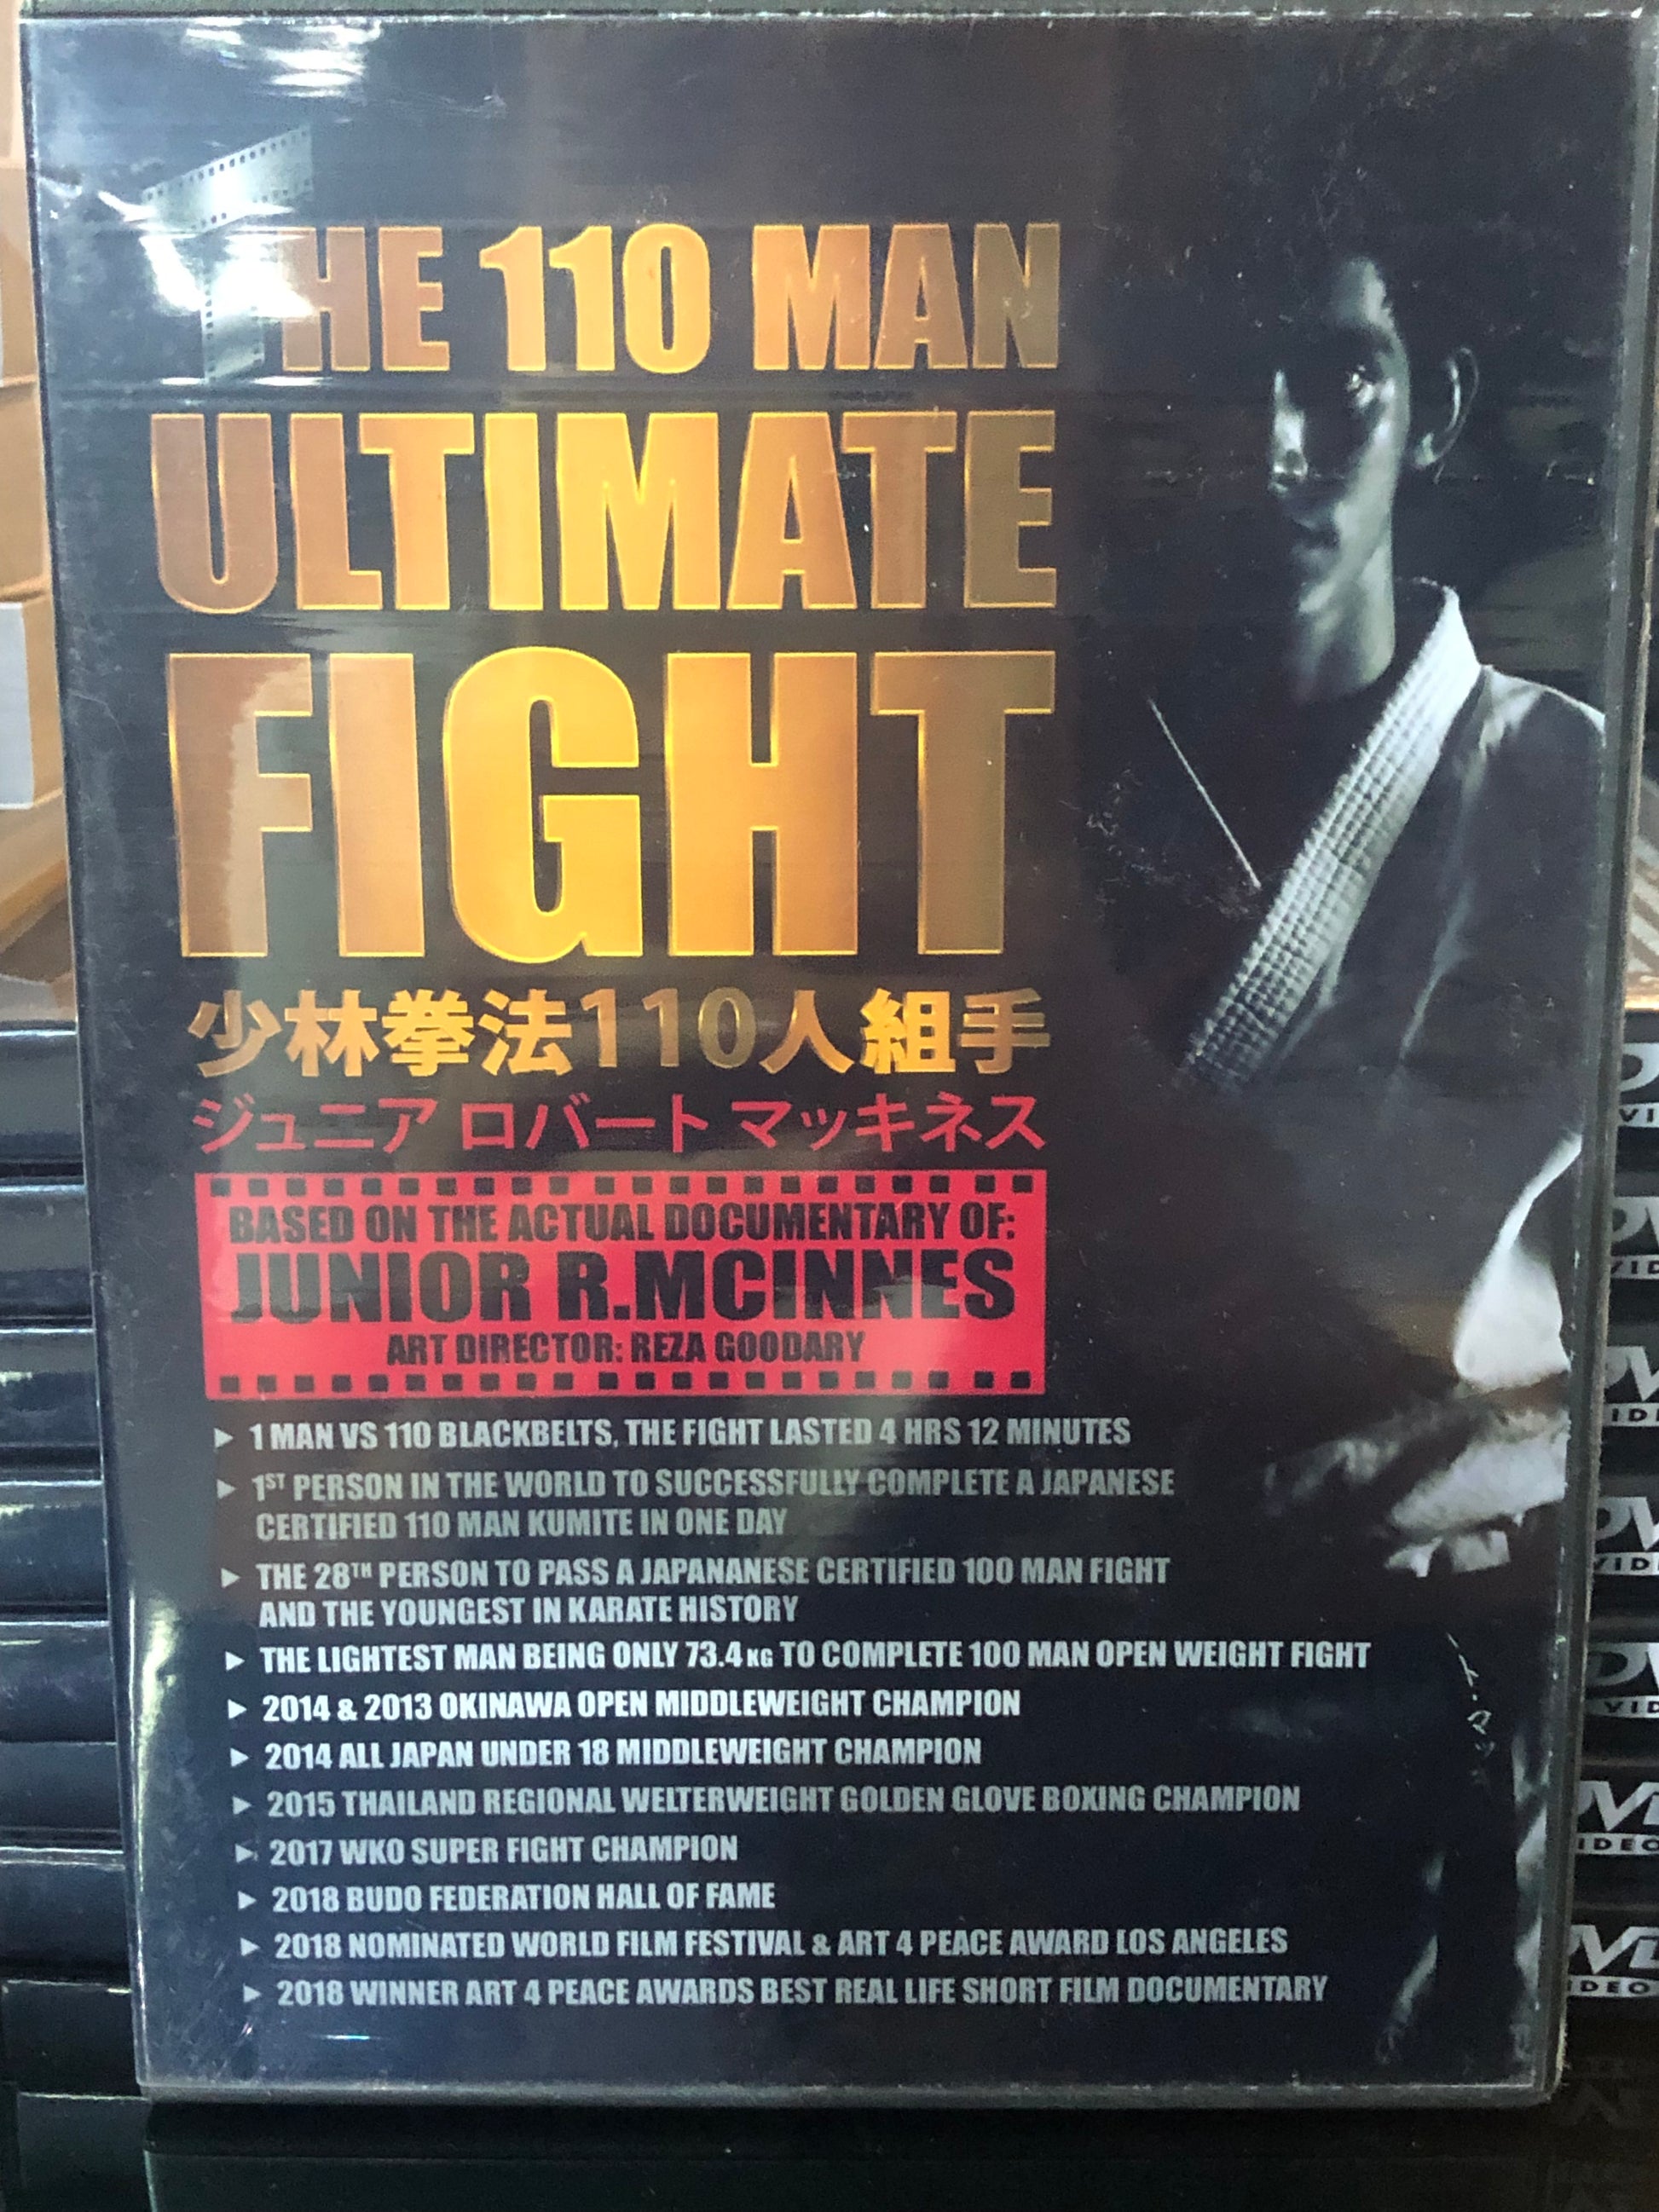 The 110 Man Ultimate Fight event